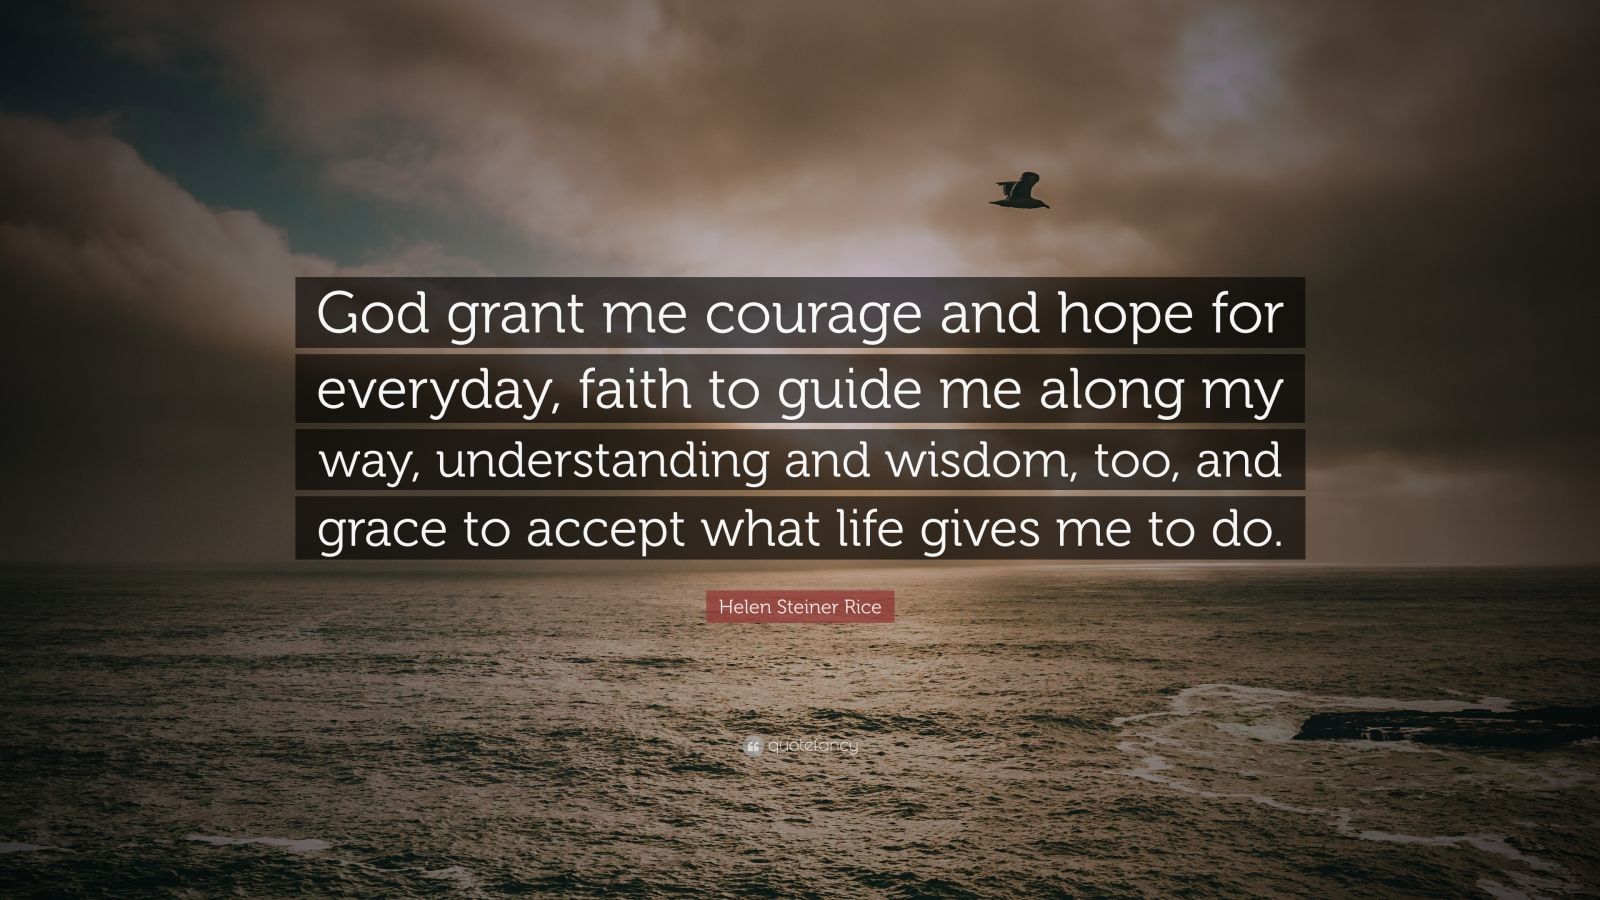 Helen Steiner Rice Quote: “God grant me courage and hope for everyday ...